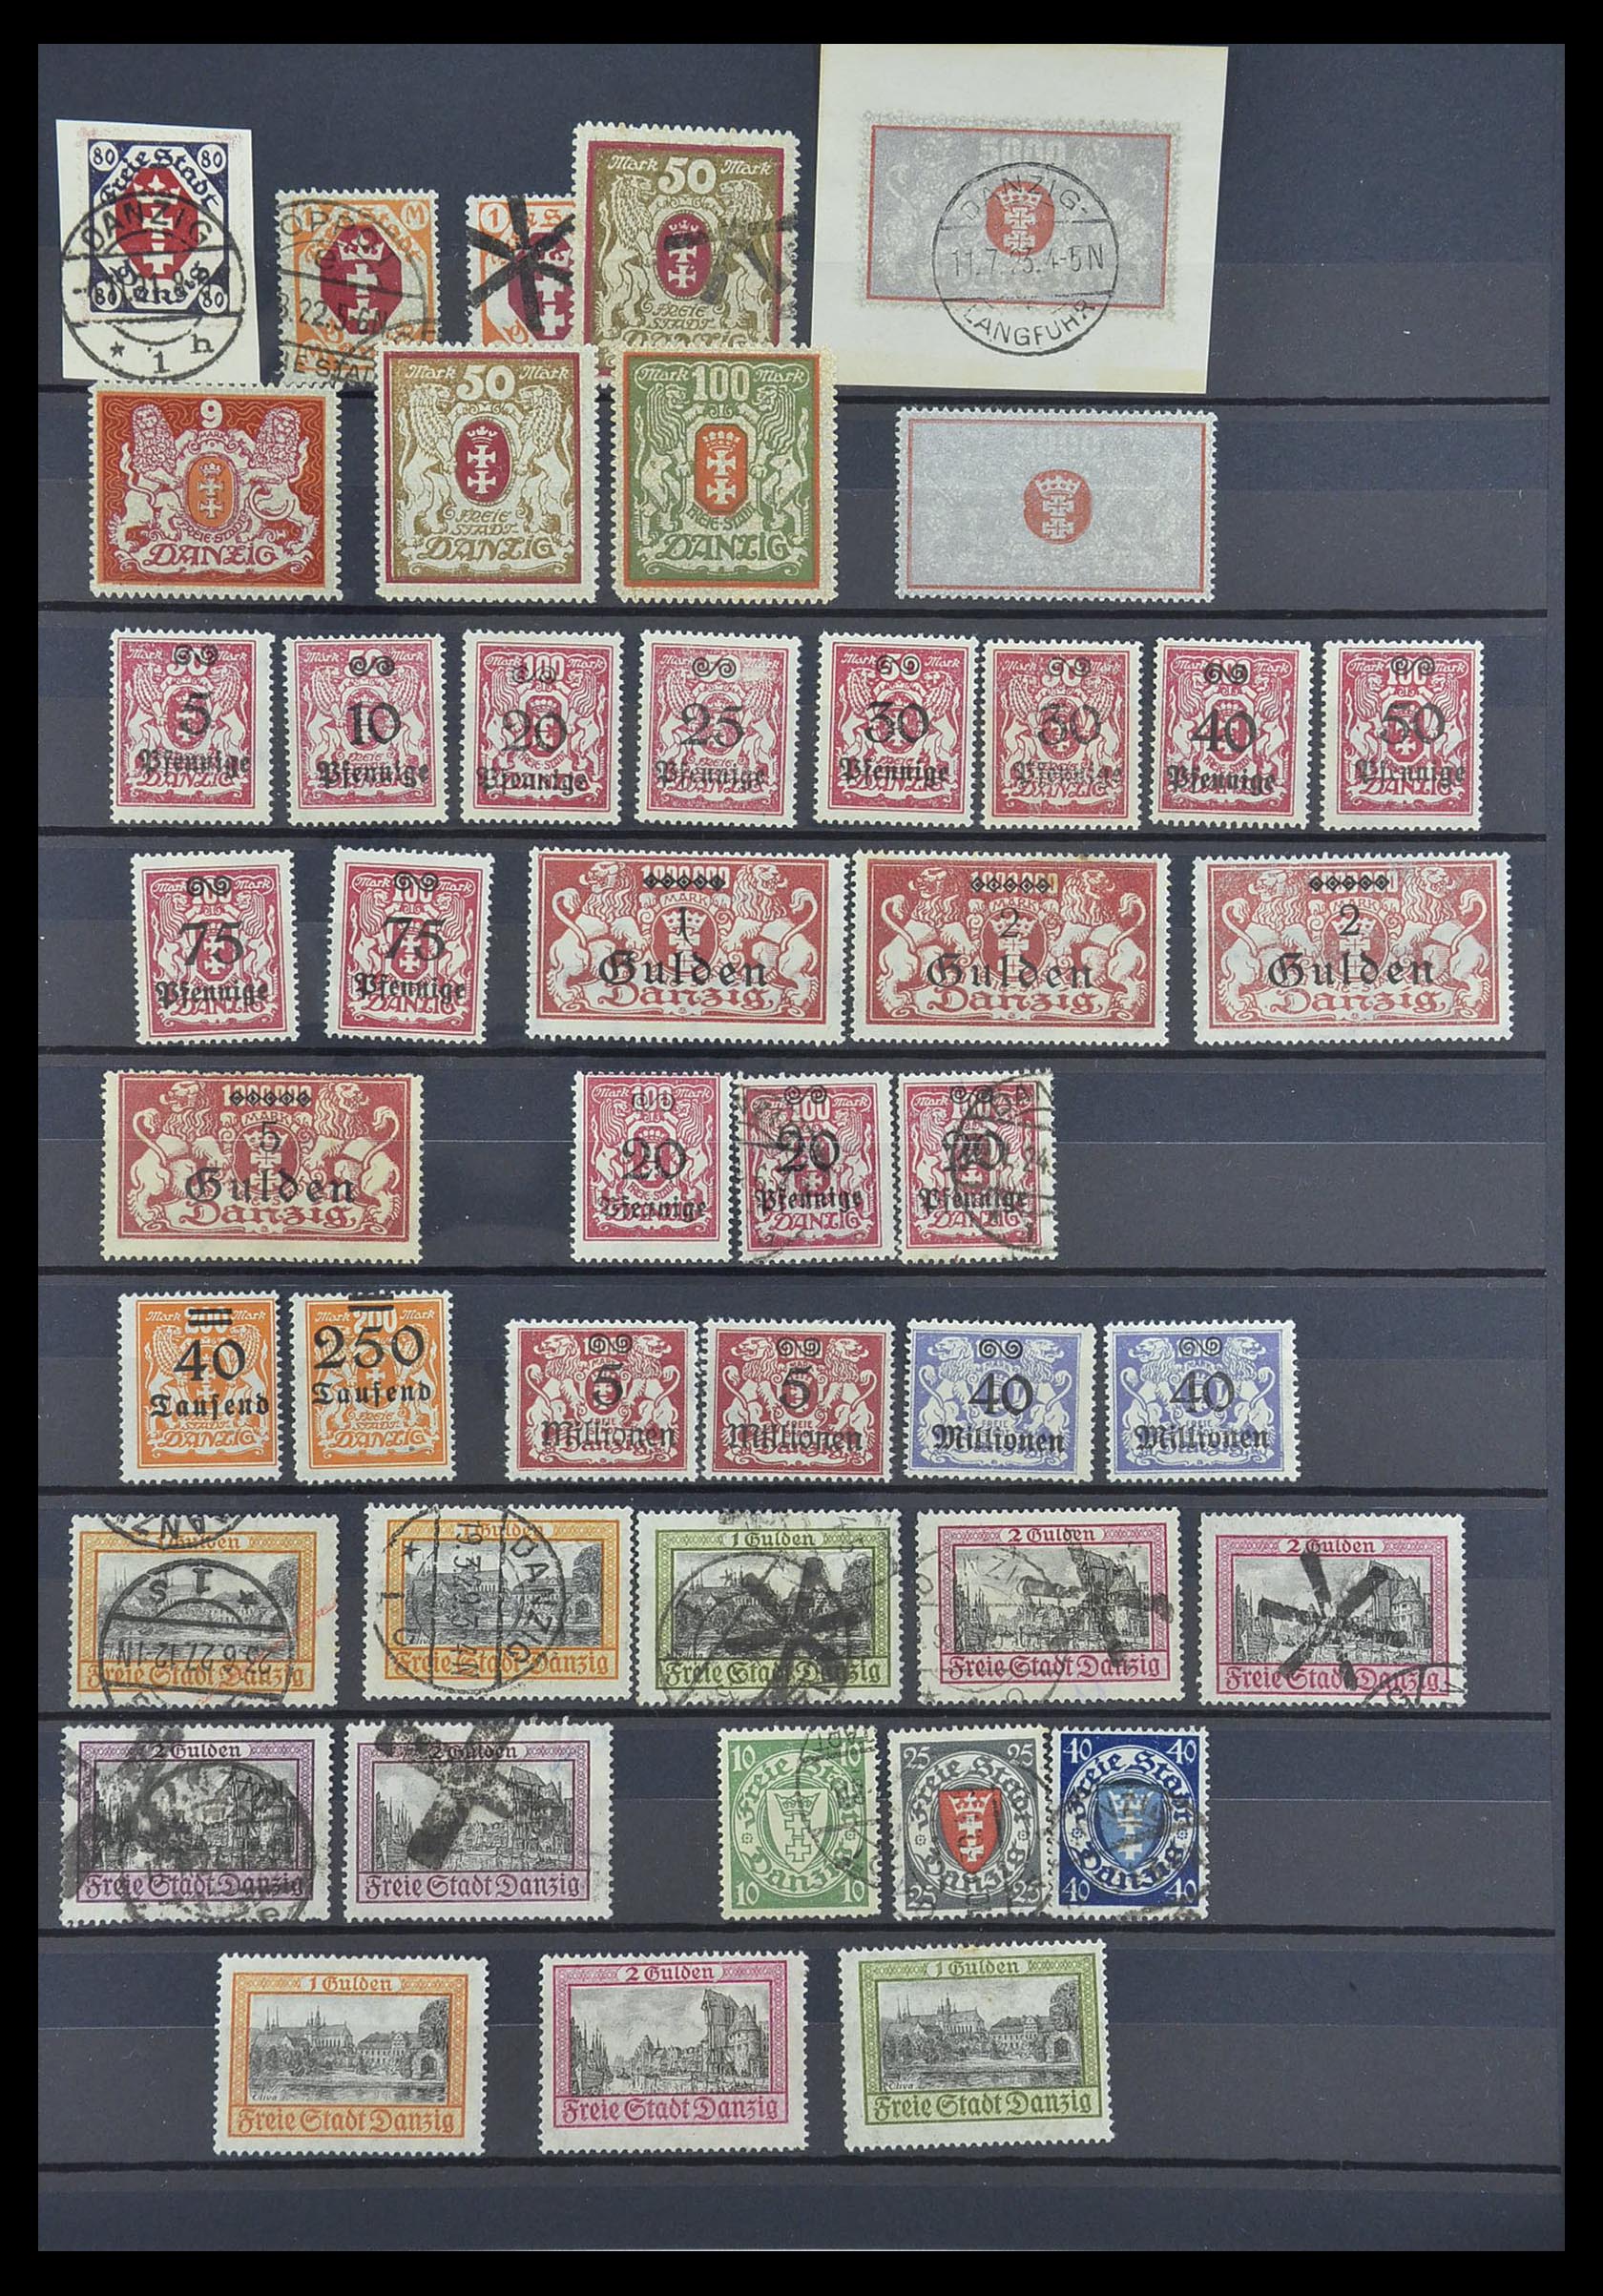 33756 086 - Stamp collection 33756 World classic 1850-1930.